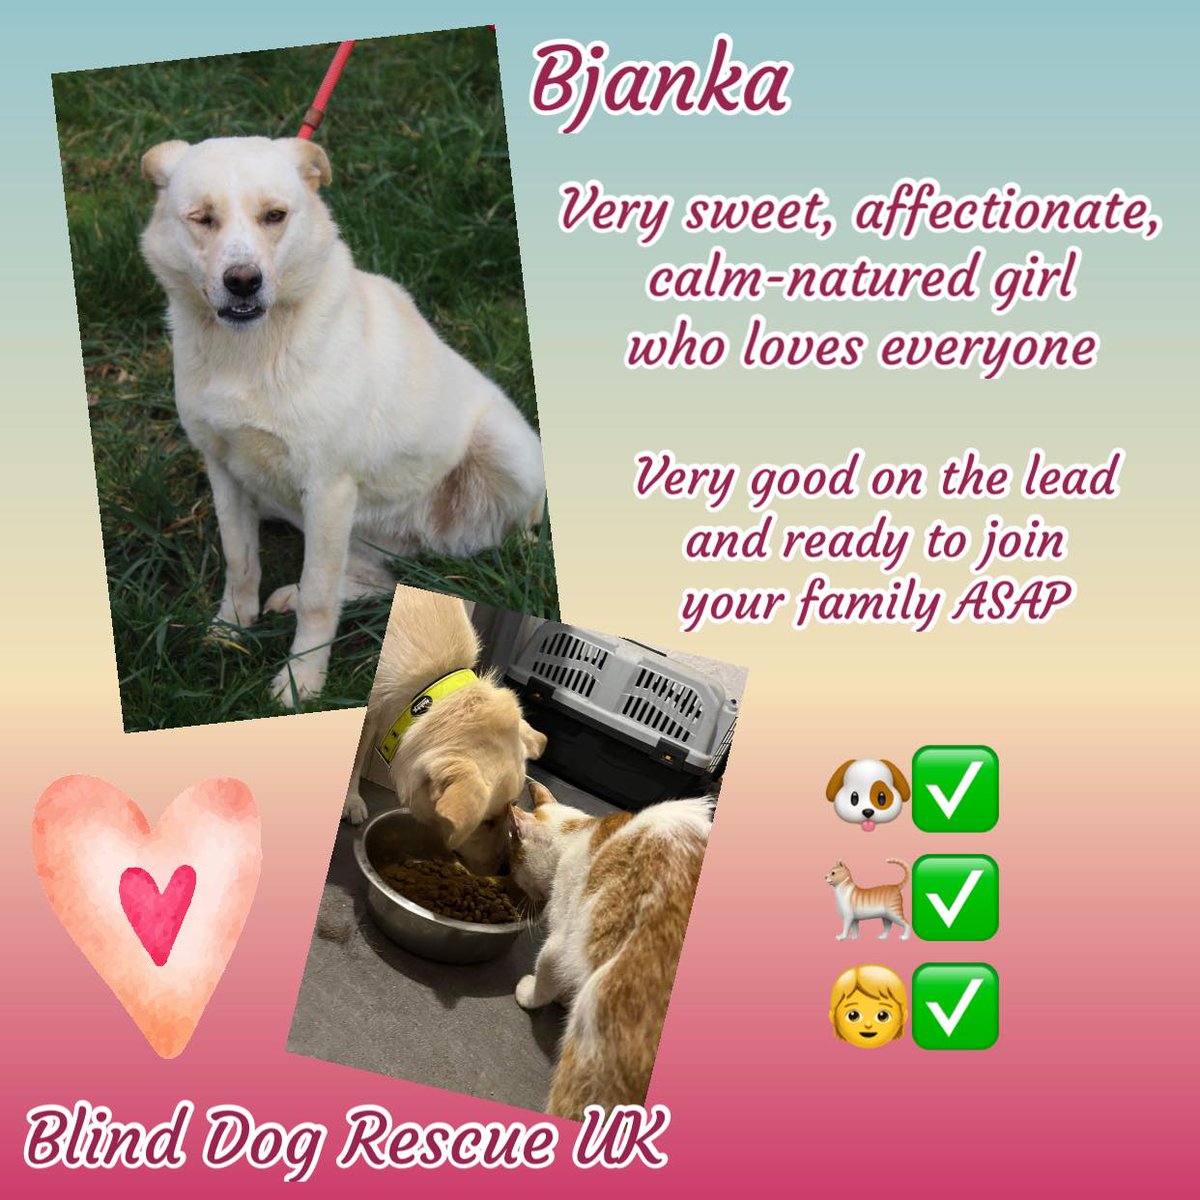 #k9hour 1yo BJANKA had one of her eyes removed due to injury so she is partially sighted. She is a very sweet, affectionate, calm natured lass who loves everyone. Bjanka is looking for a home where she can be part of the family & be loved & looked after. She is in #Bosnia & can…